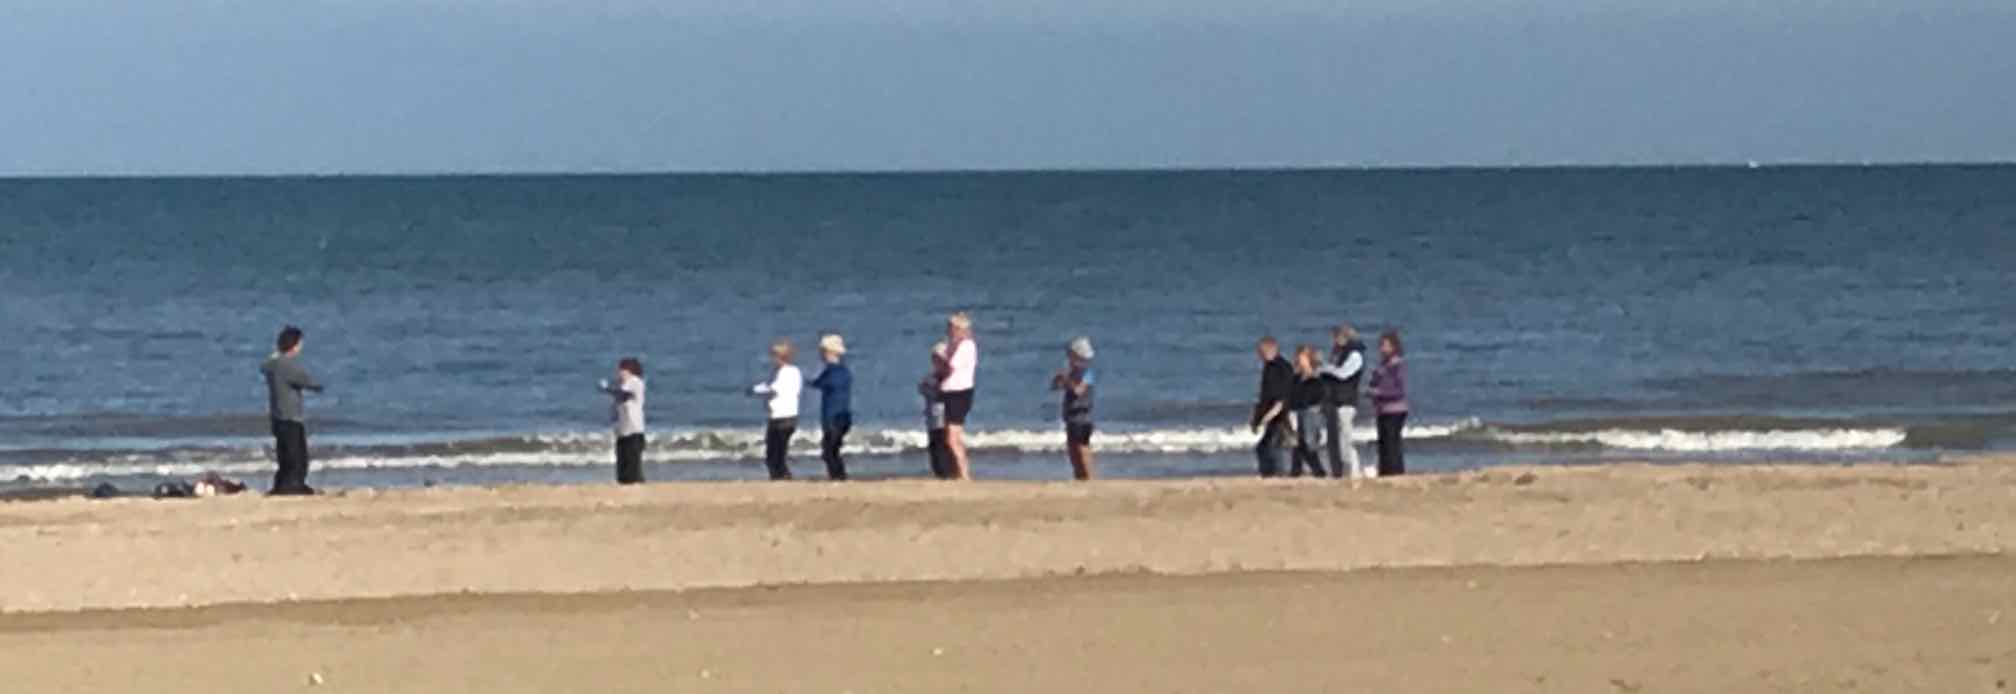 certain age French exercising on beach in September